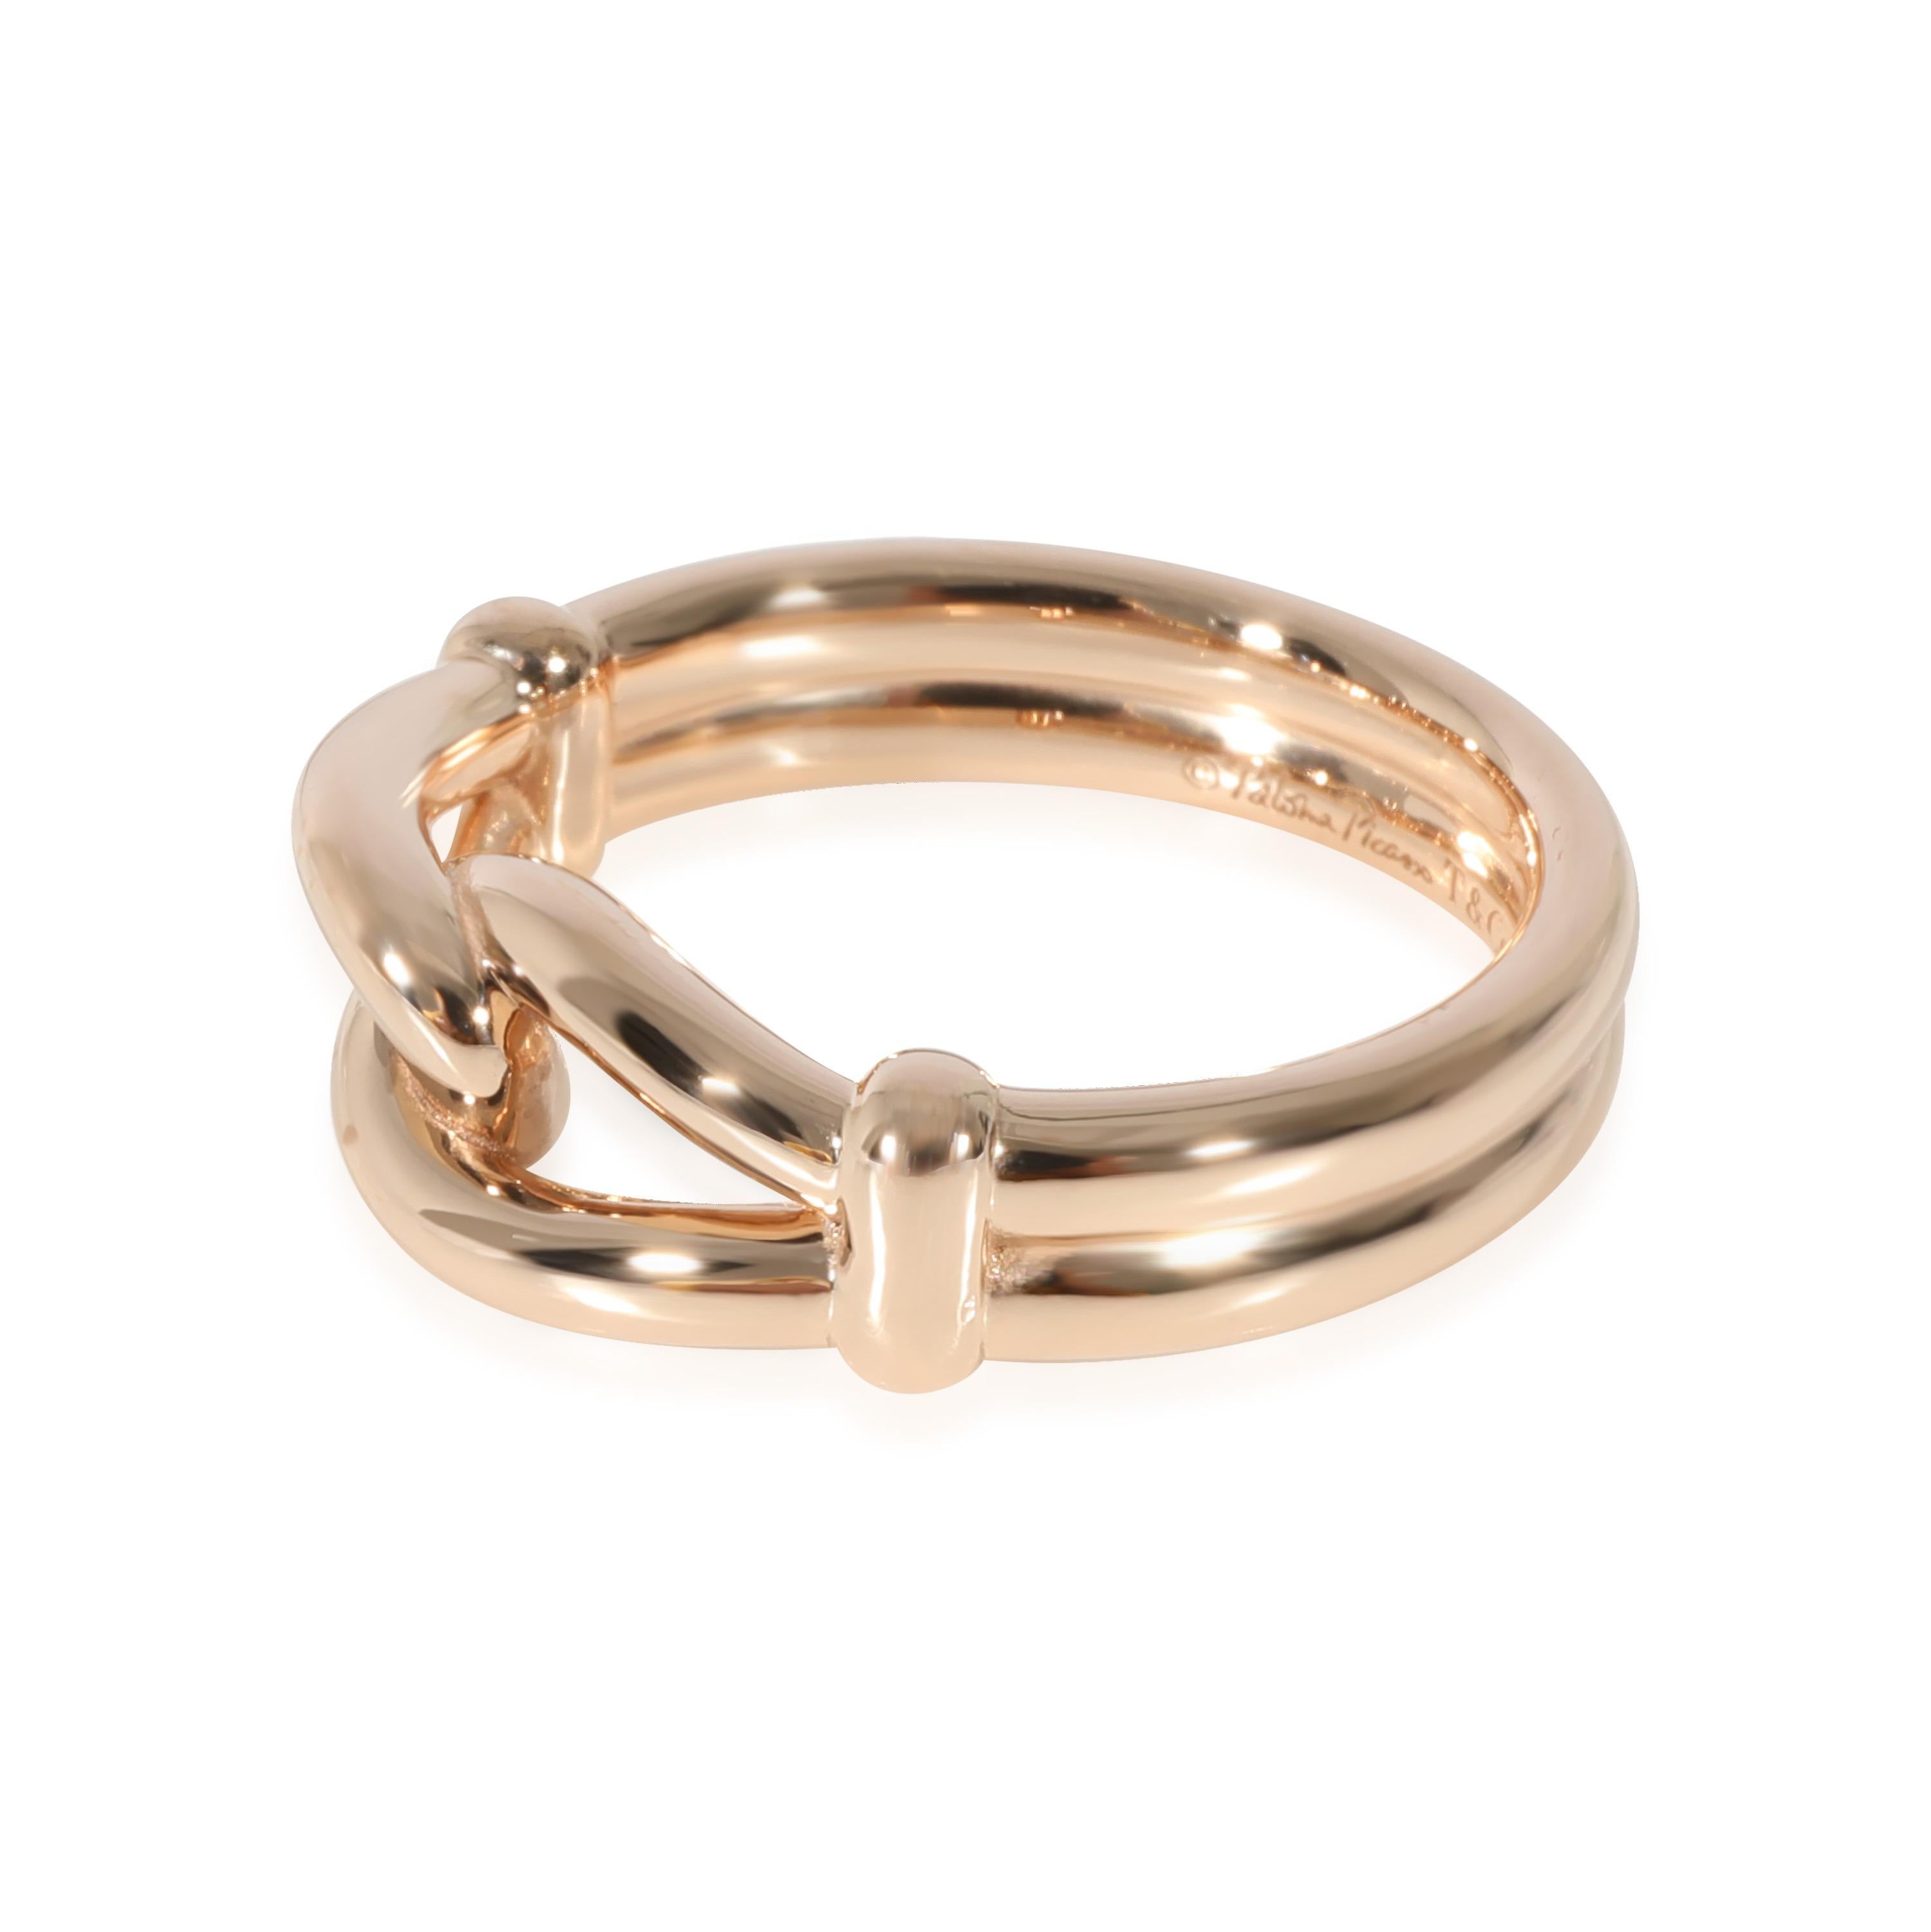 Women's or Men's Tiffany & Co. Paloma Picasso Ring in 18k Rose Gold